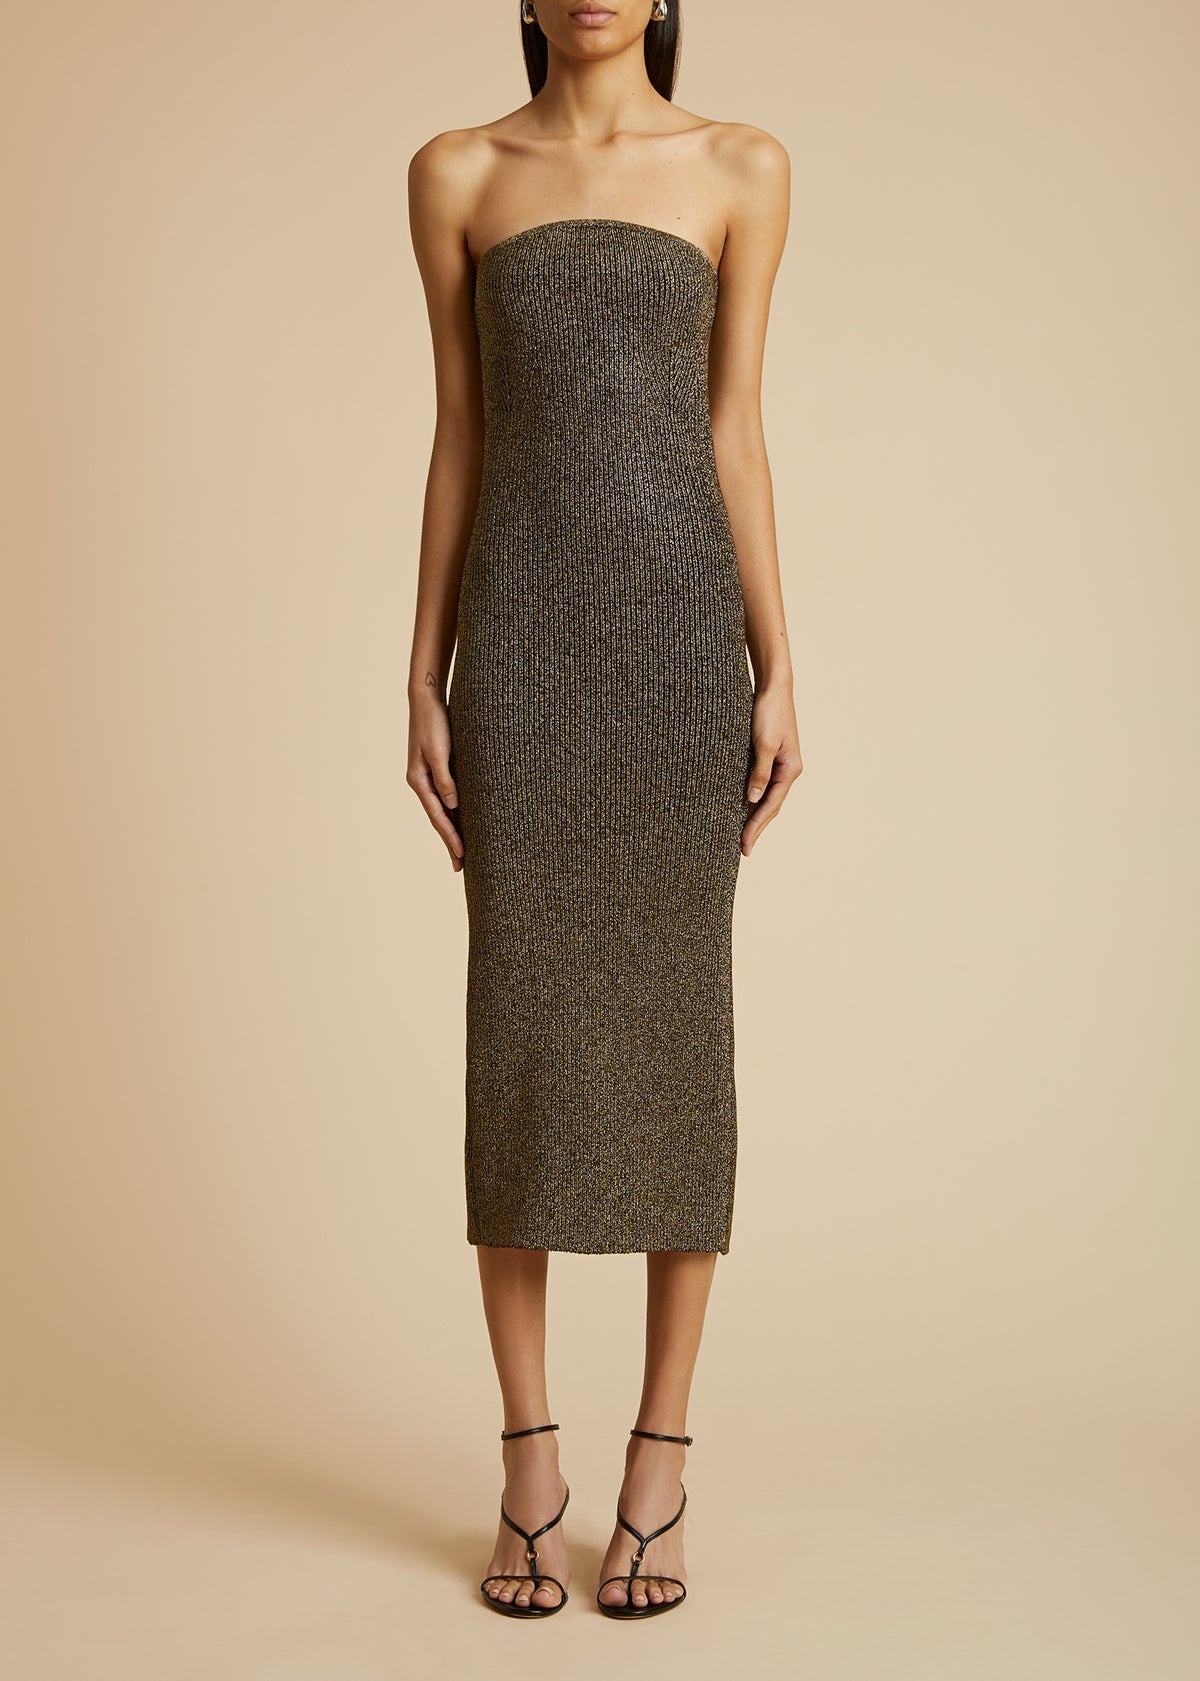 The Rumer Dress in Gold - 2